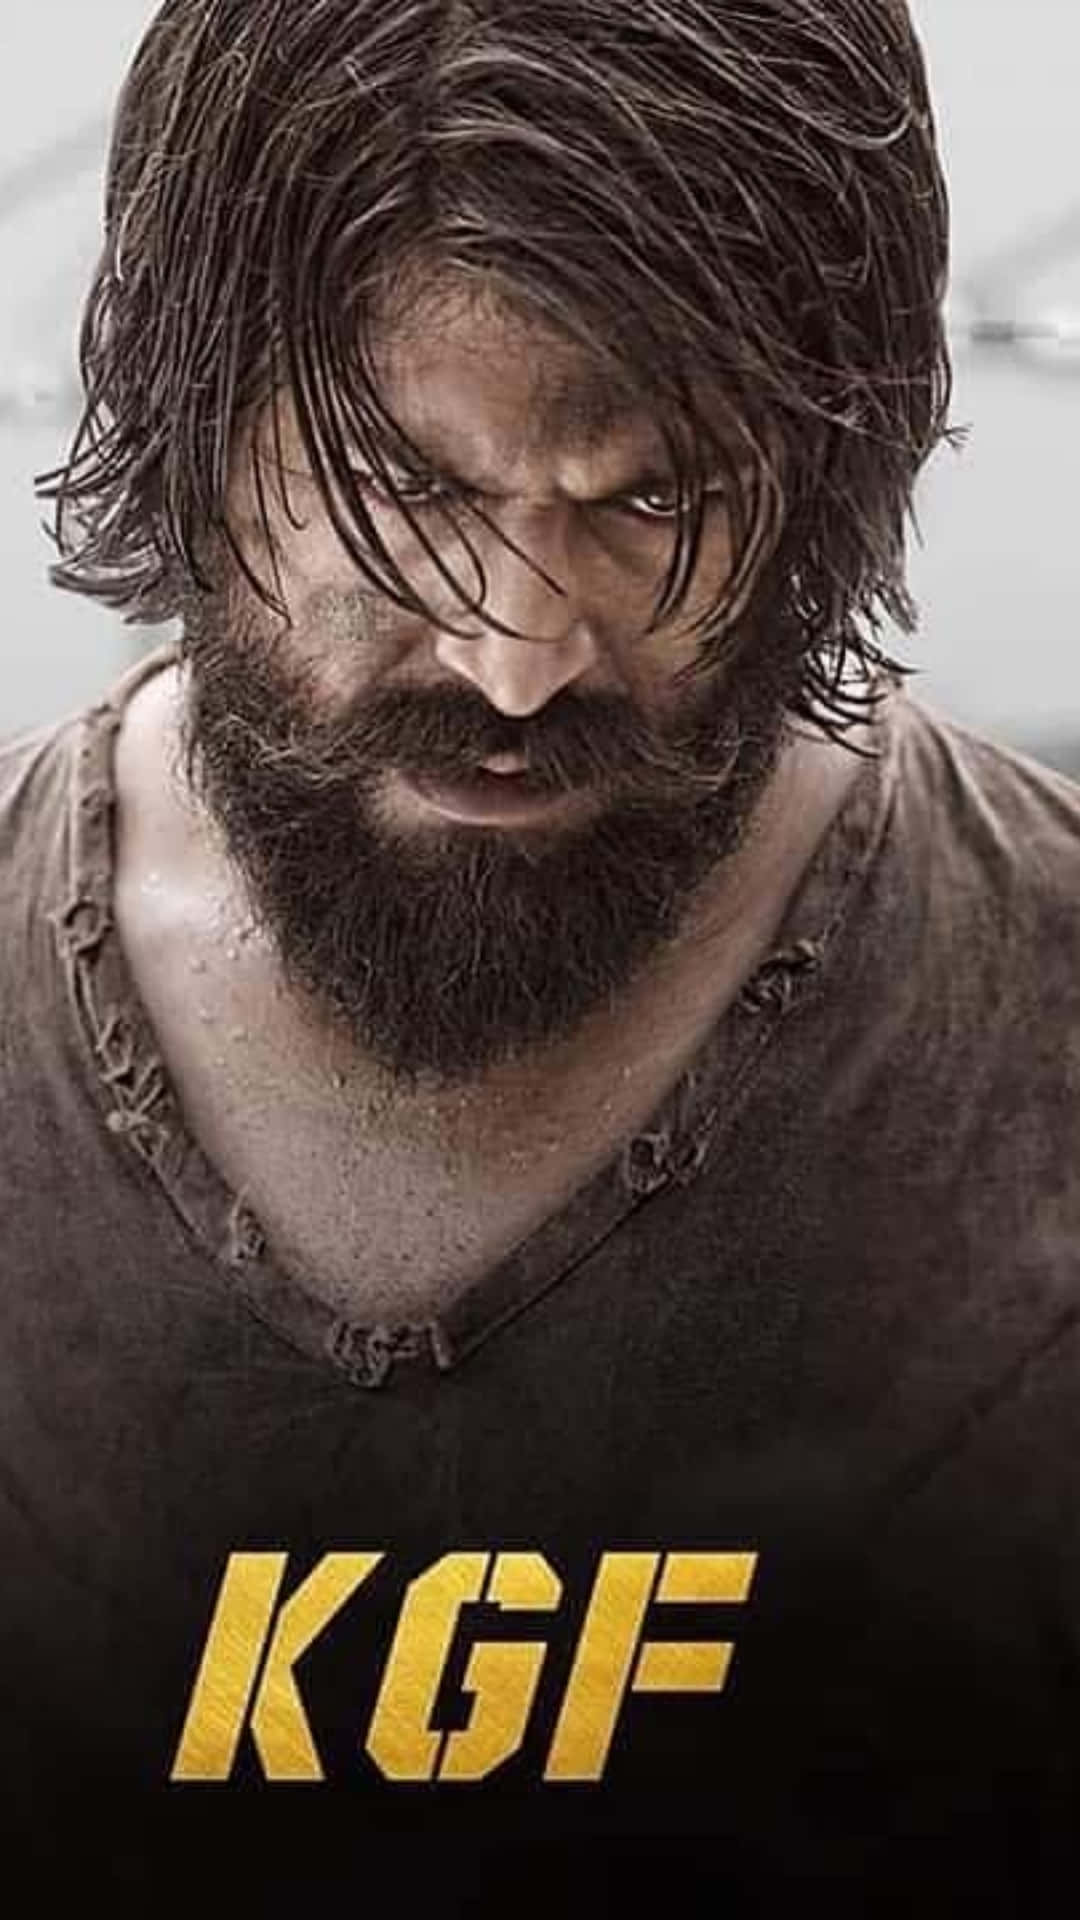 Rocky Balboa takes the lead in the explosive sequel KGF 2